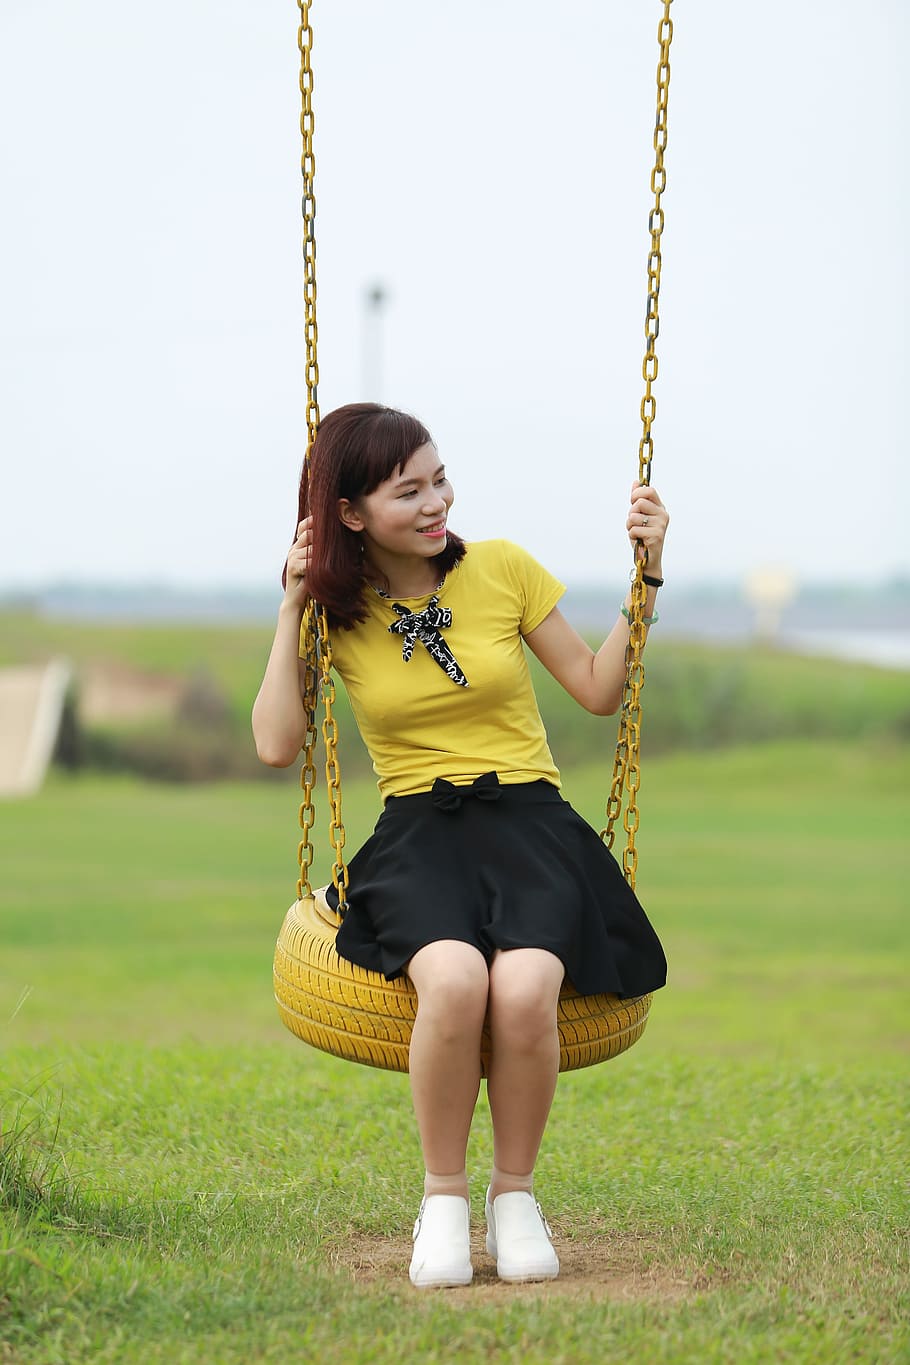 woman, leisure, girl, swing, fun, full length, one person, leisure activity, real people, sitting